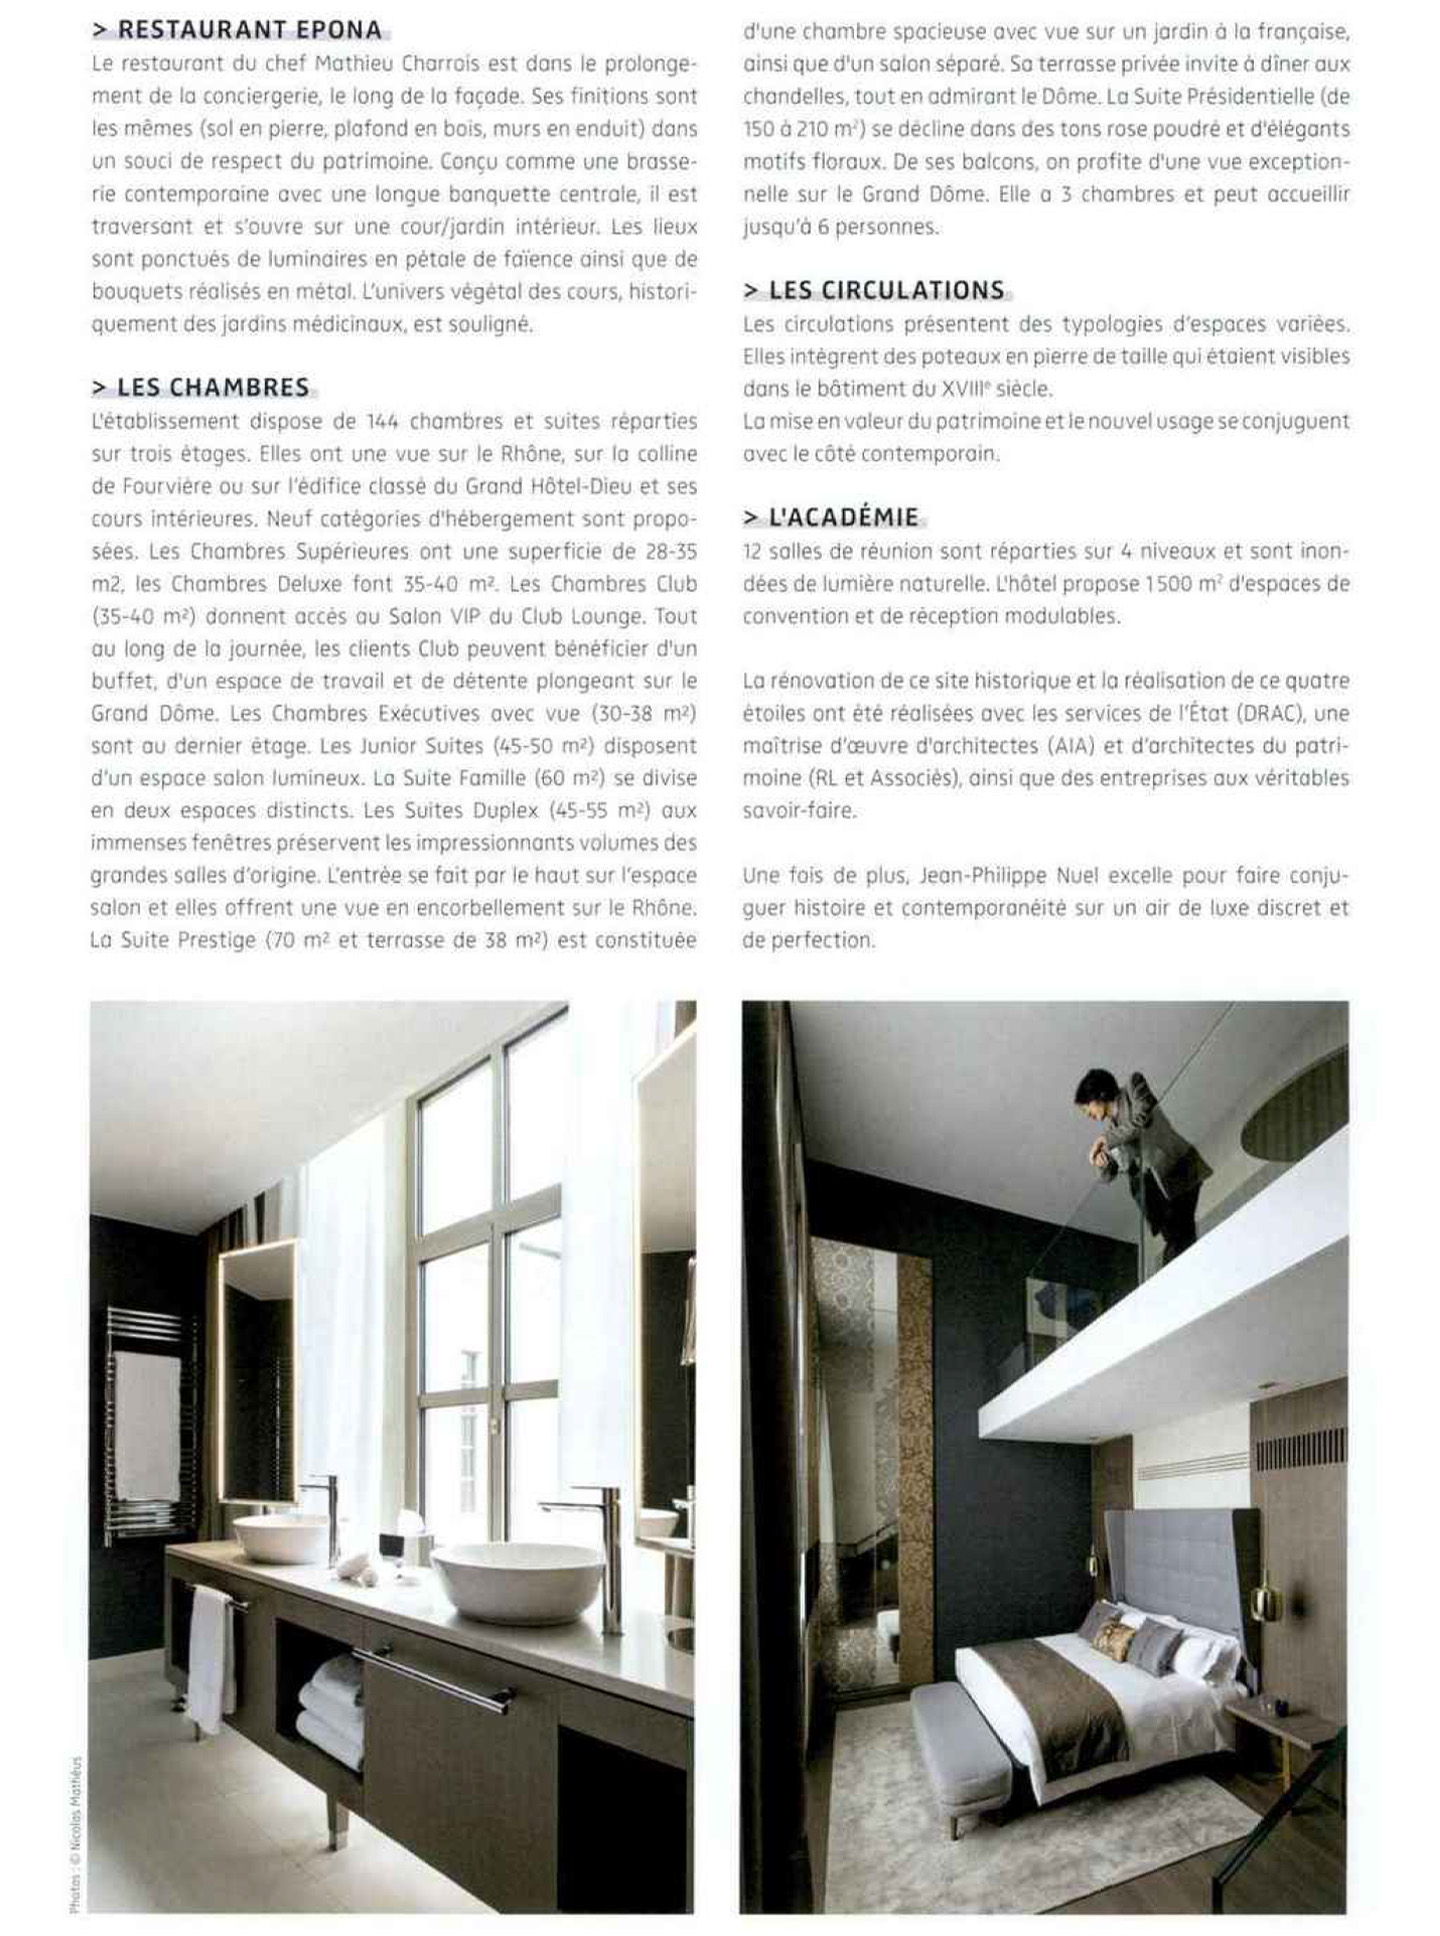 Article on the InterContinental Lyon Hotel Dieu realized by the studio jean-Philippe Nuel in the magazine NDA, new luxury hotel, luxury interior design, historical heritage